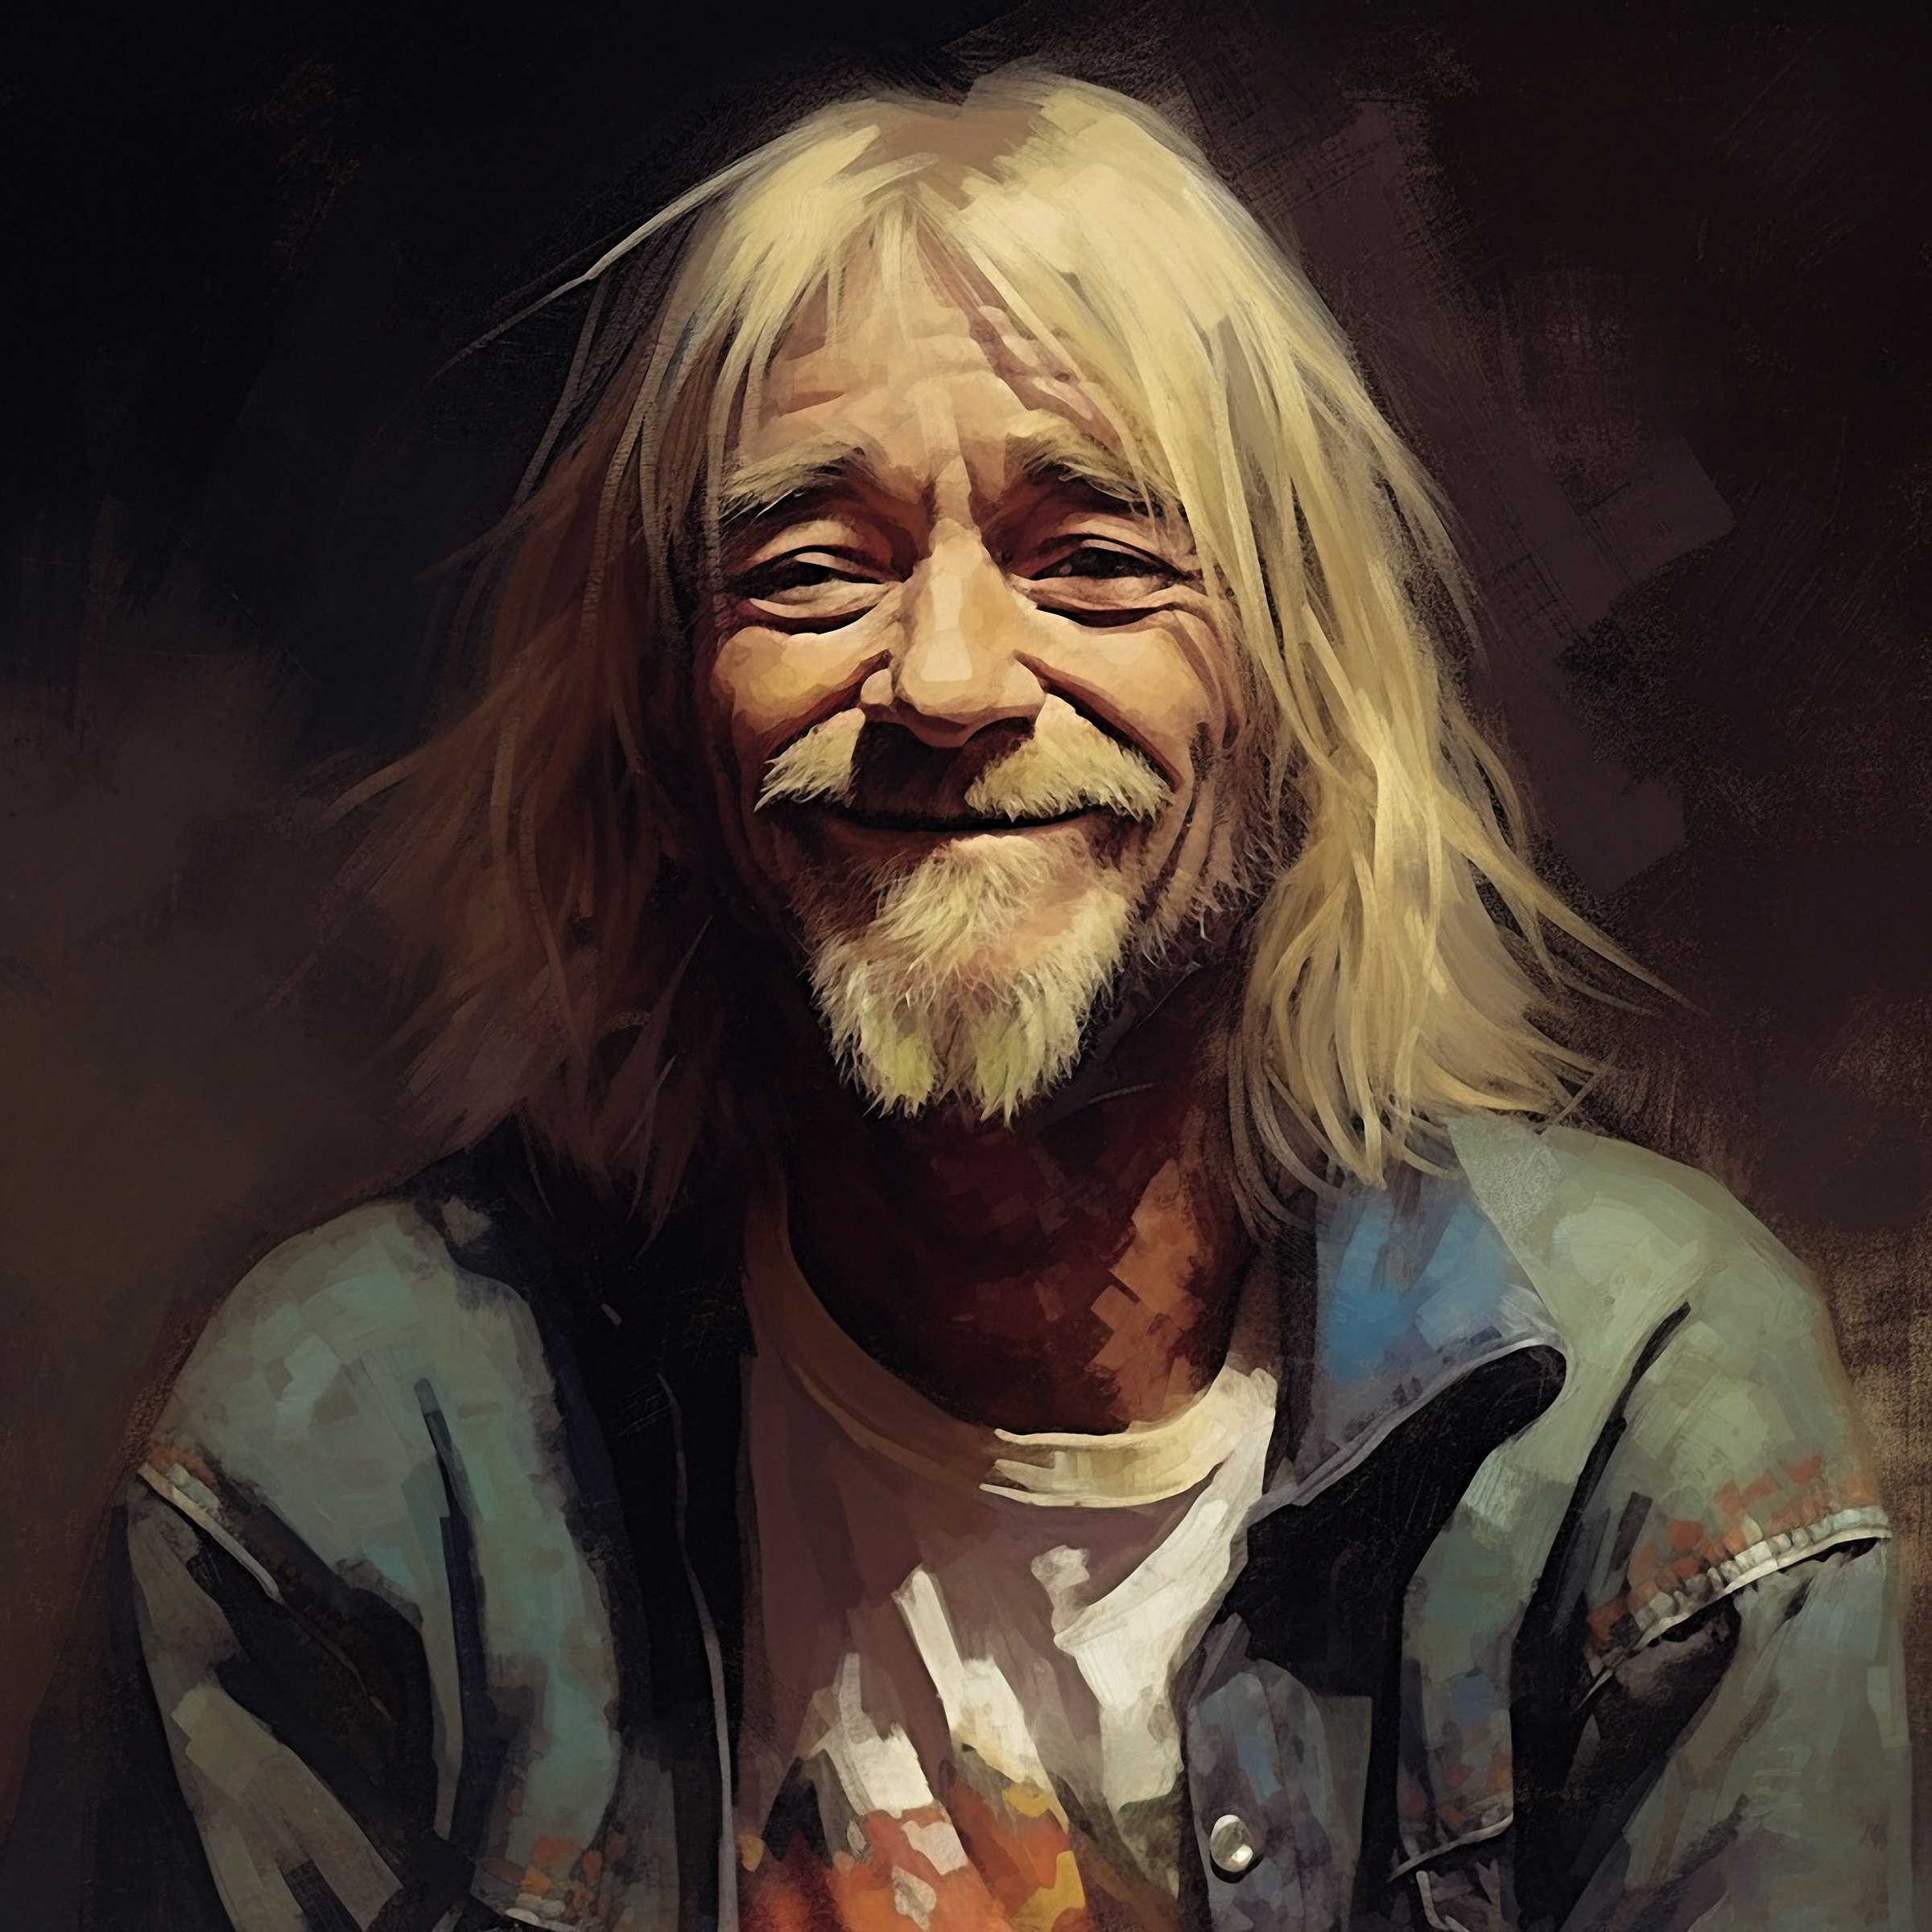 Cobain imagined as an older person